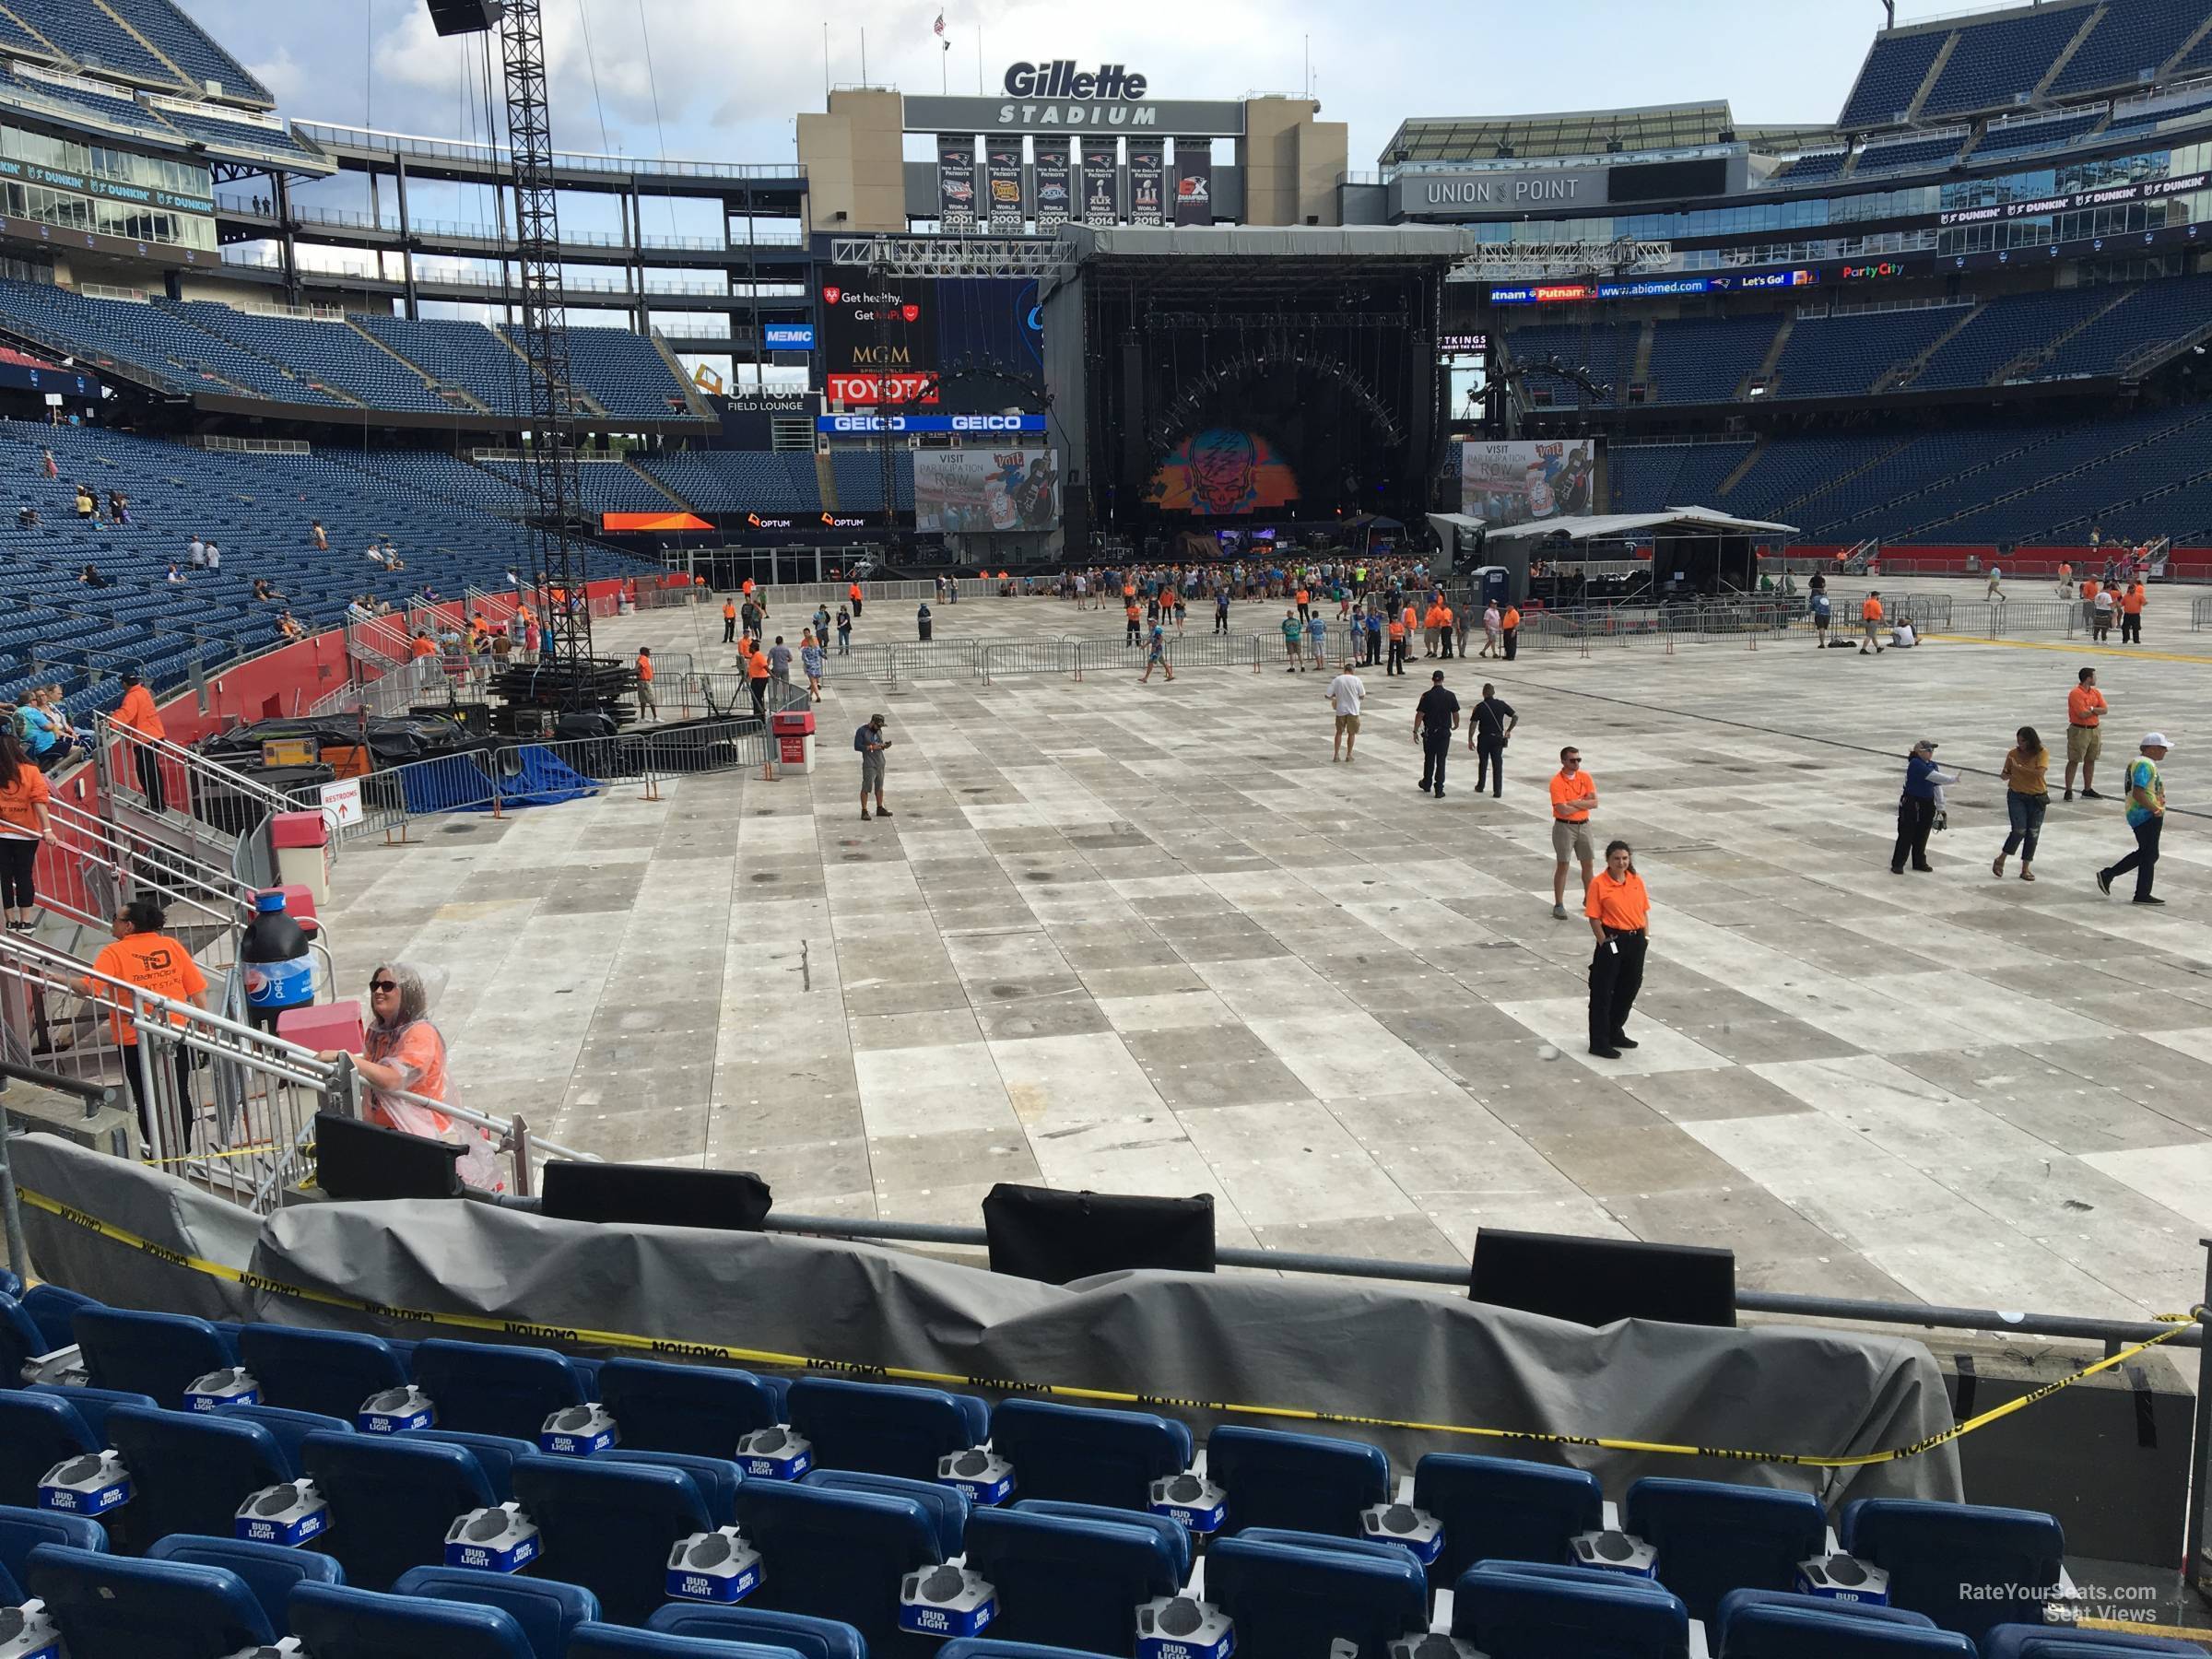 Gillette Stadium Section 101 Concert Seating - RateYourSeats.com